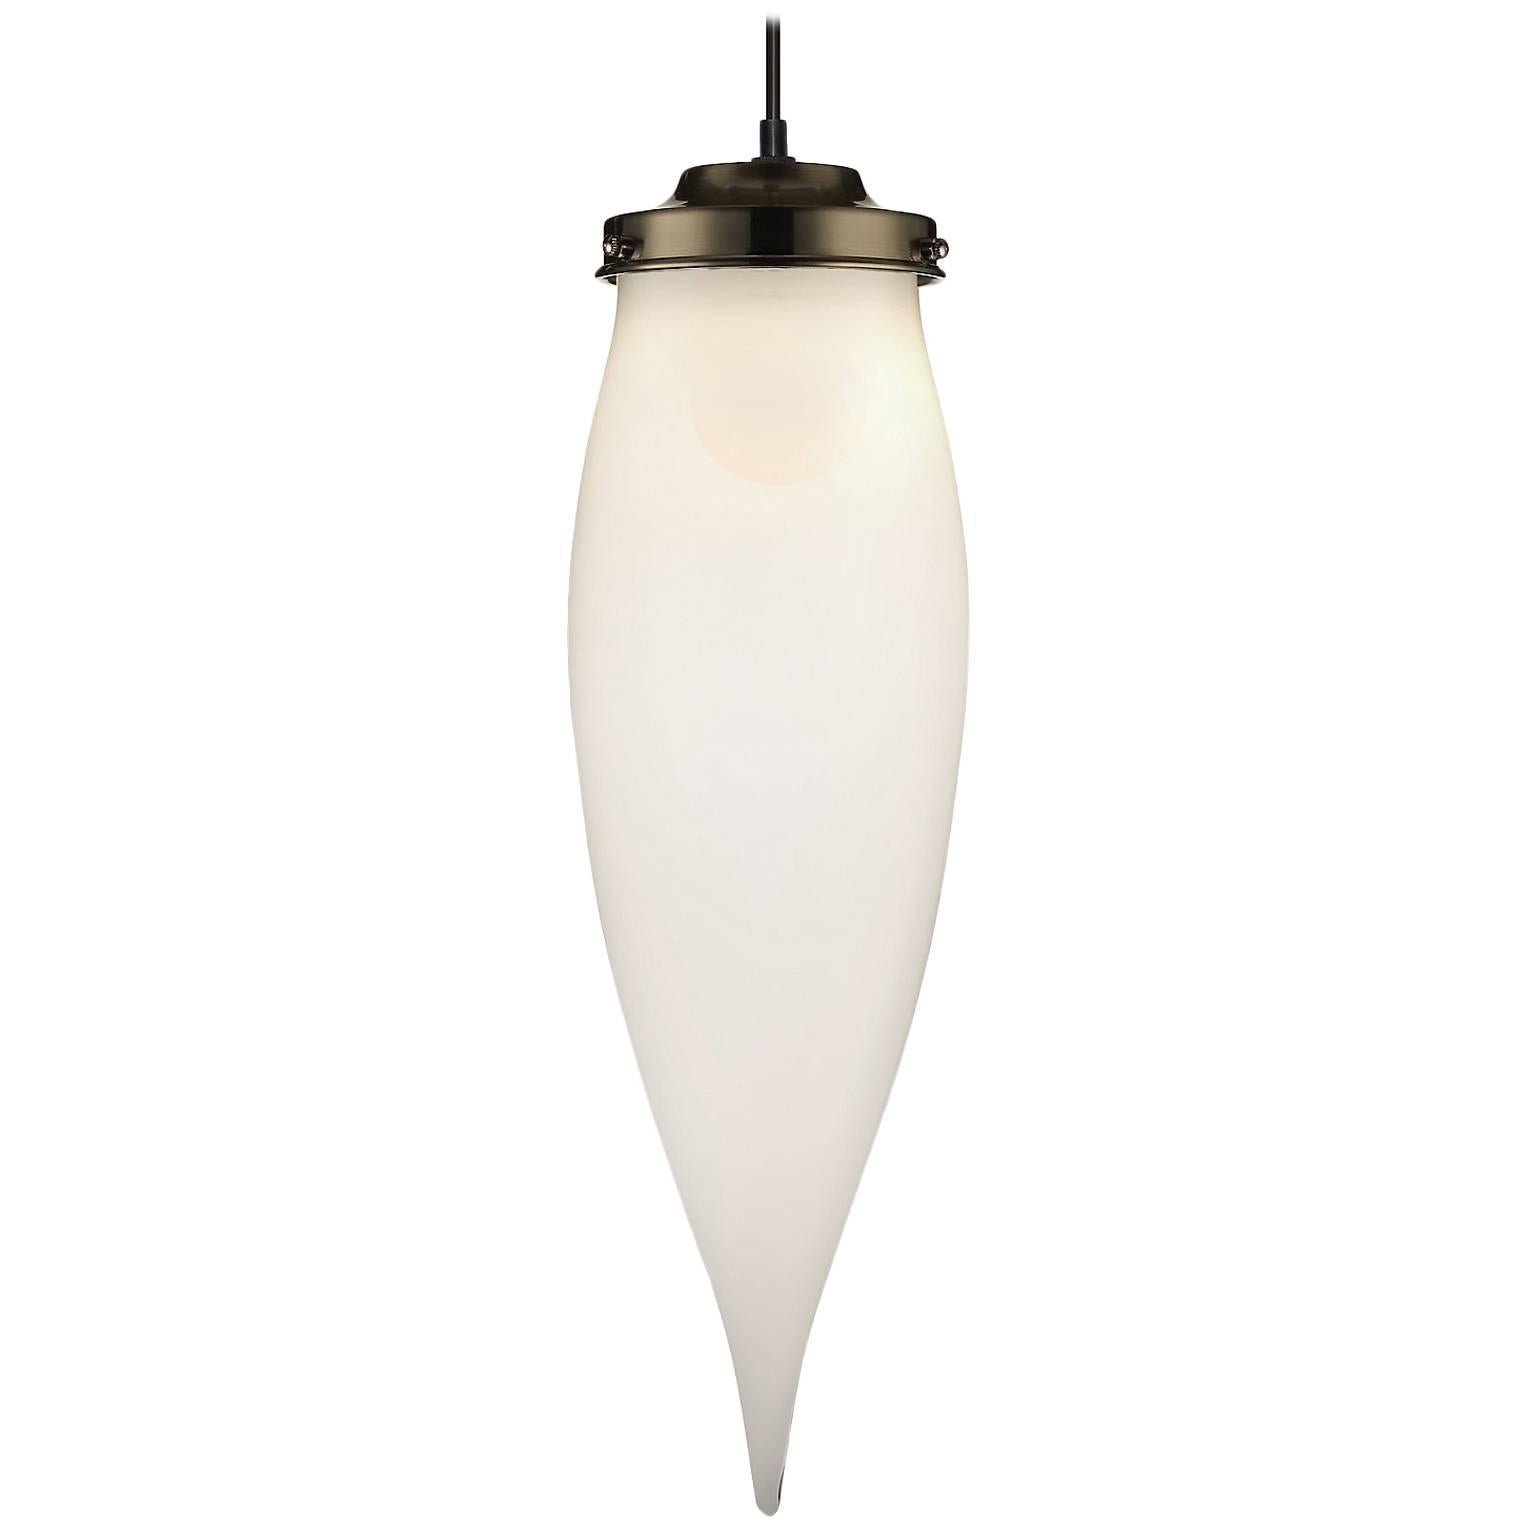 Pointelle Petite Opaline Handblown Modern Glass Pendant Light, Made in the USA For Sale